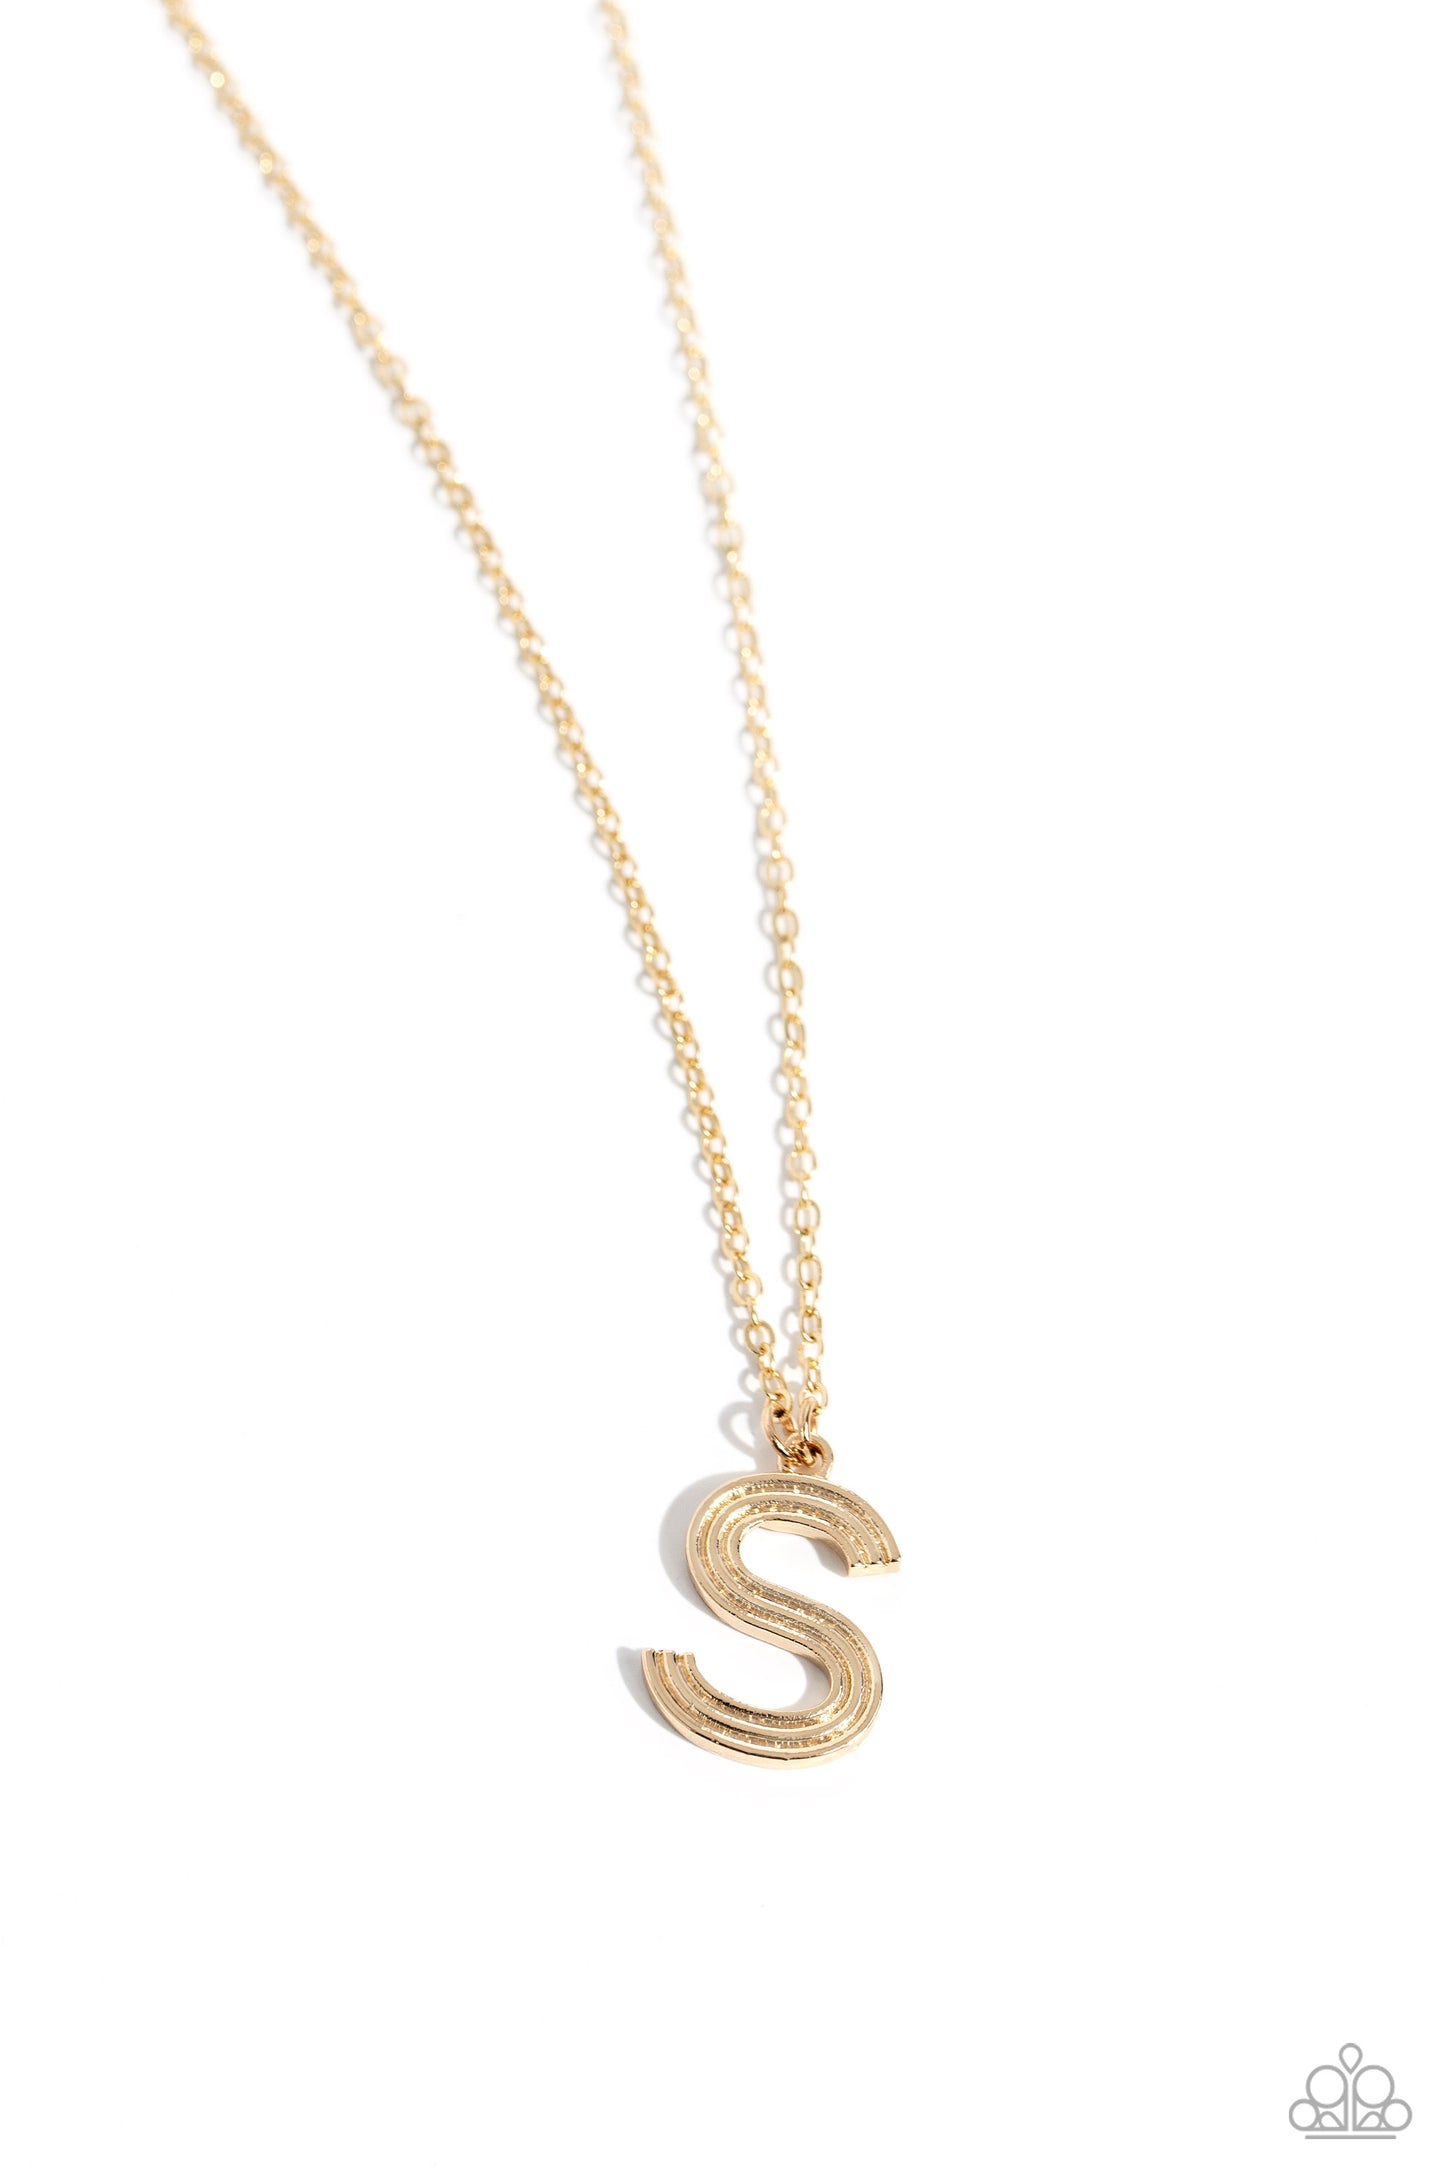 Leave Your Initials Paparazzi Accessories Necklace with Earrings Gold - S